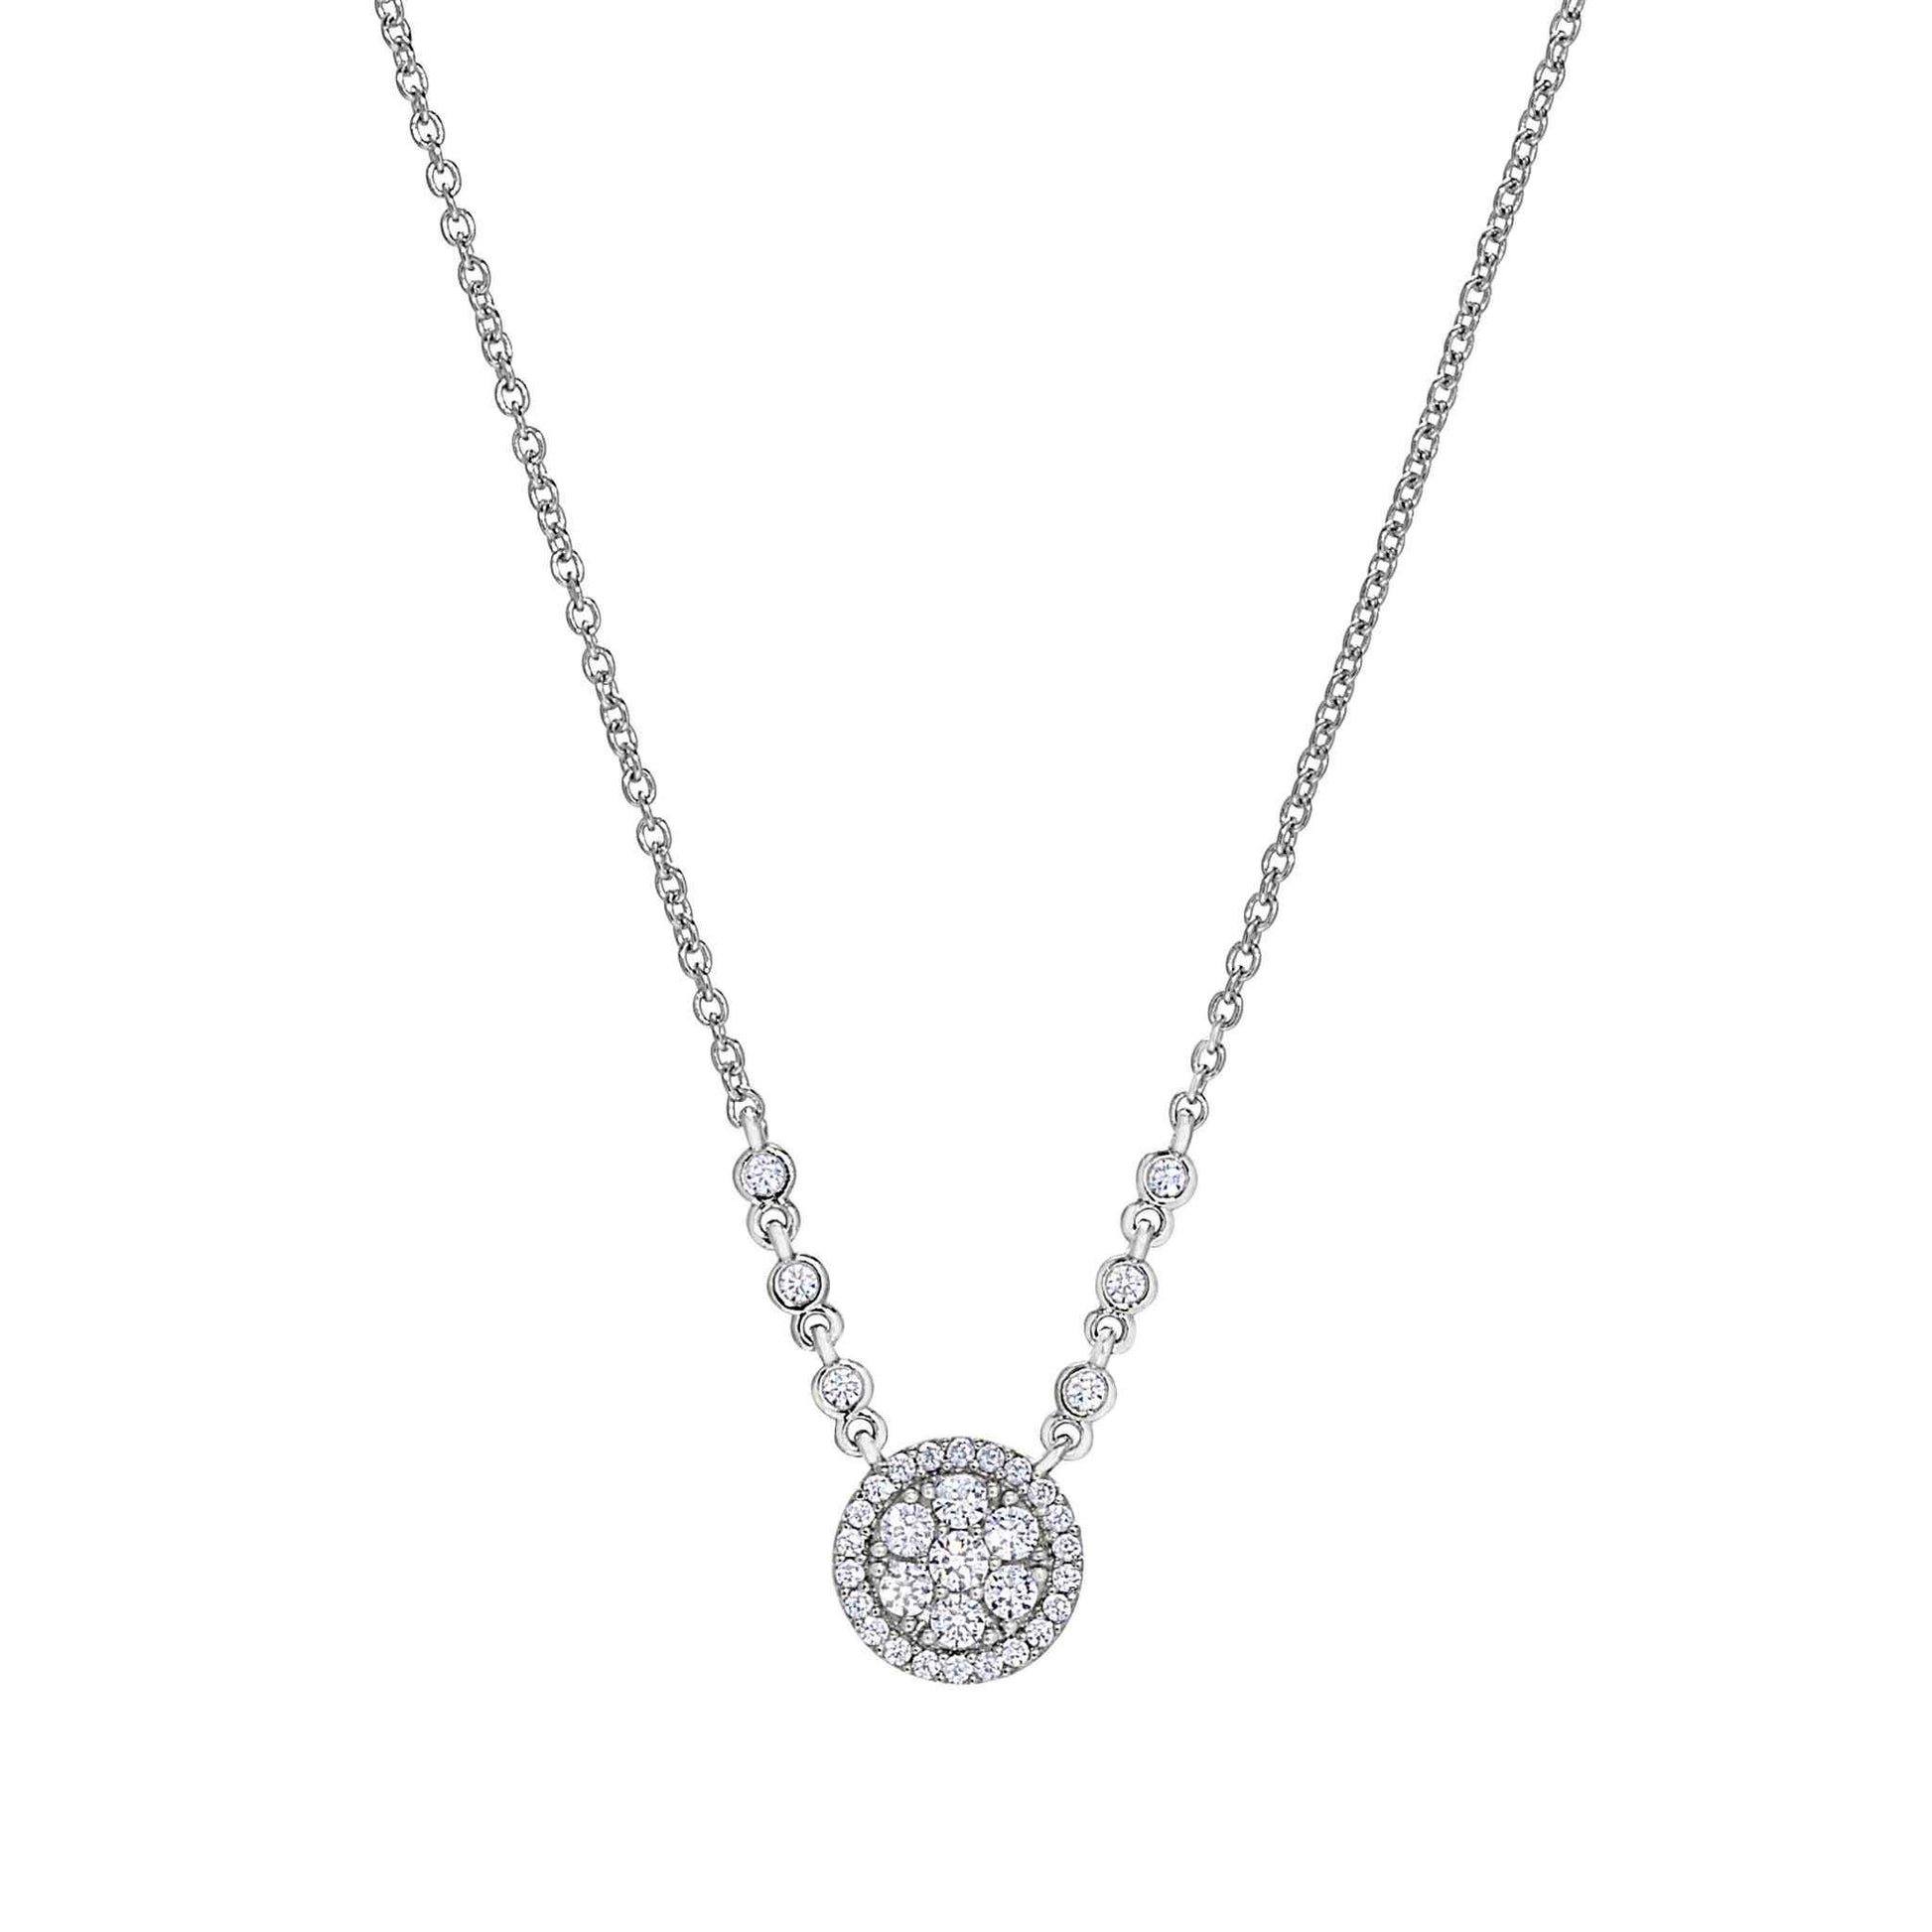 A necklace with simulated diamonds displayed on a neutral white background.